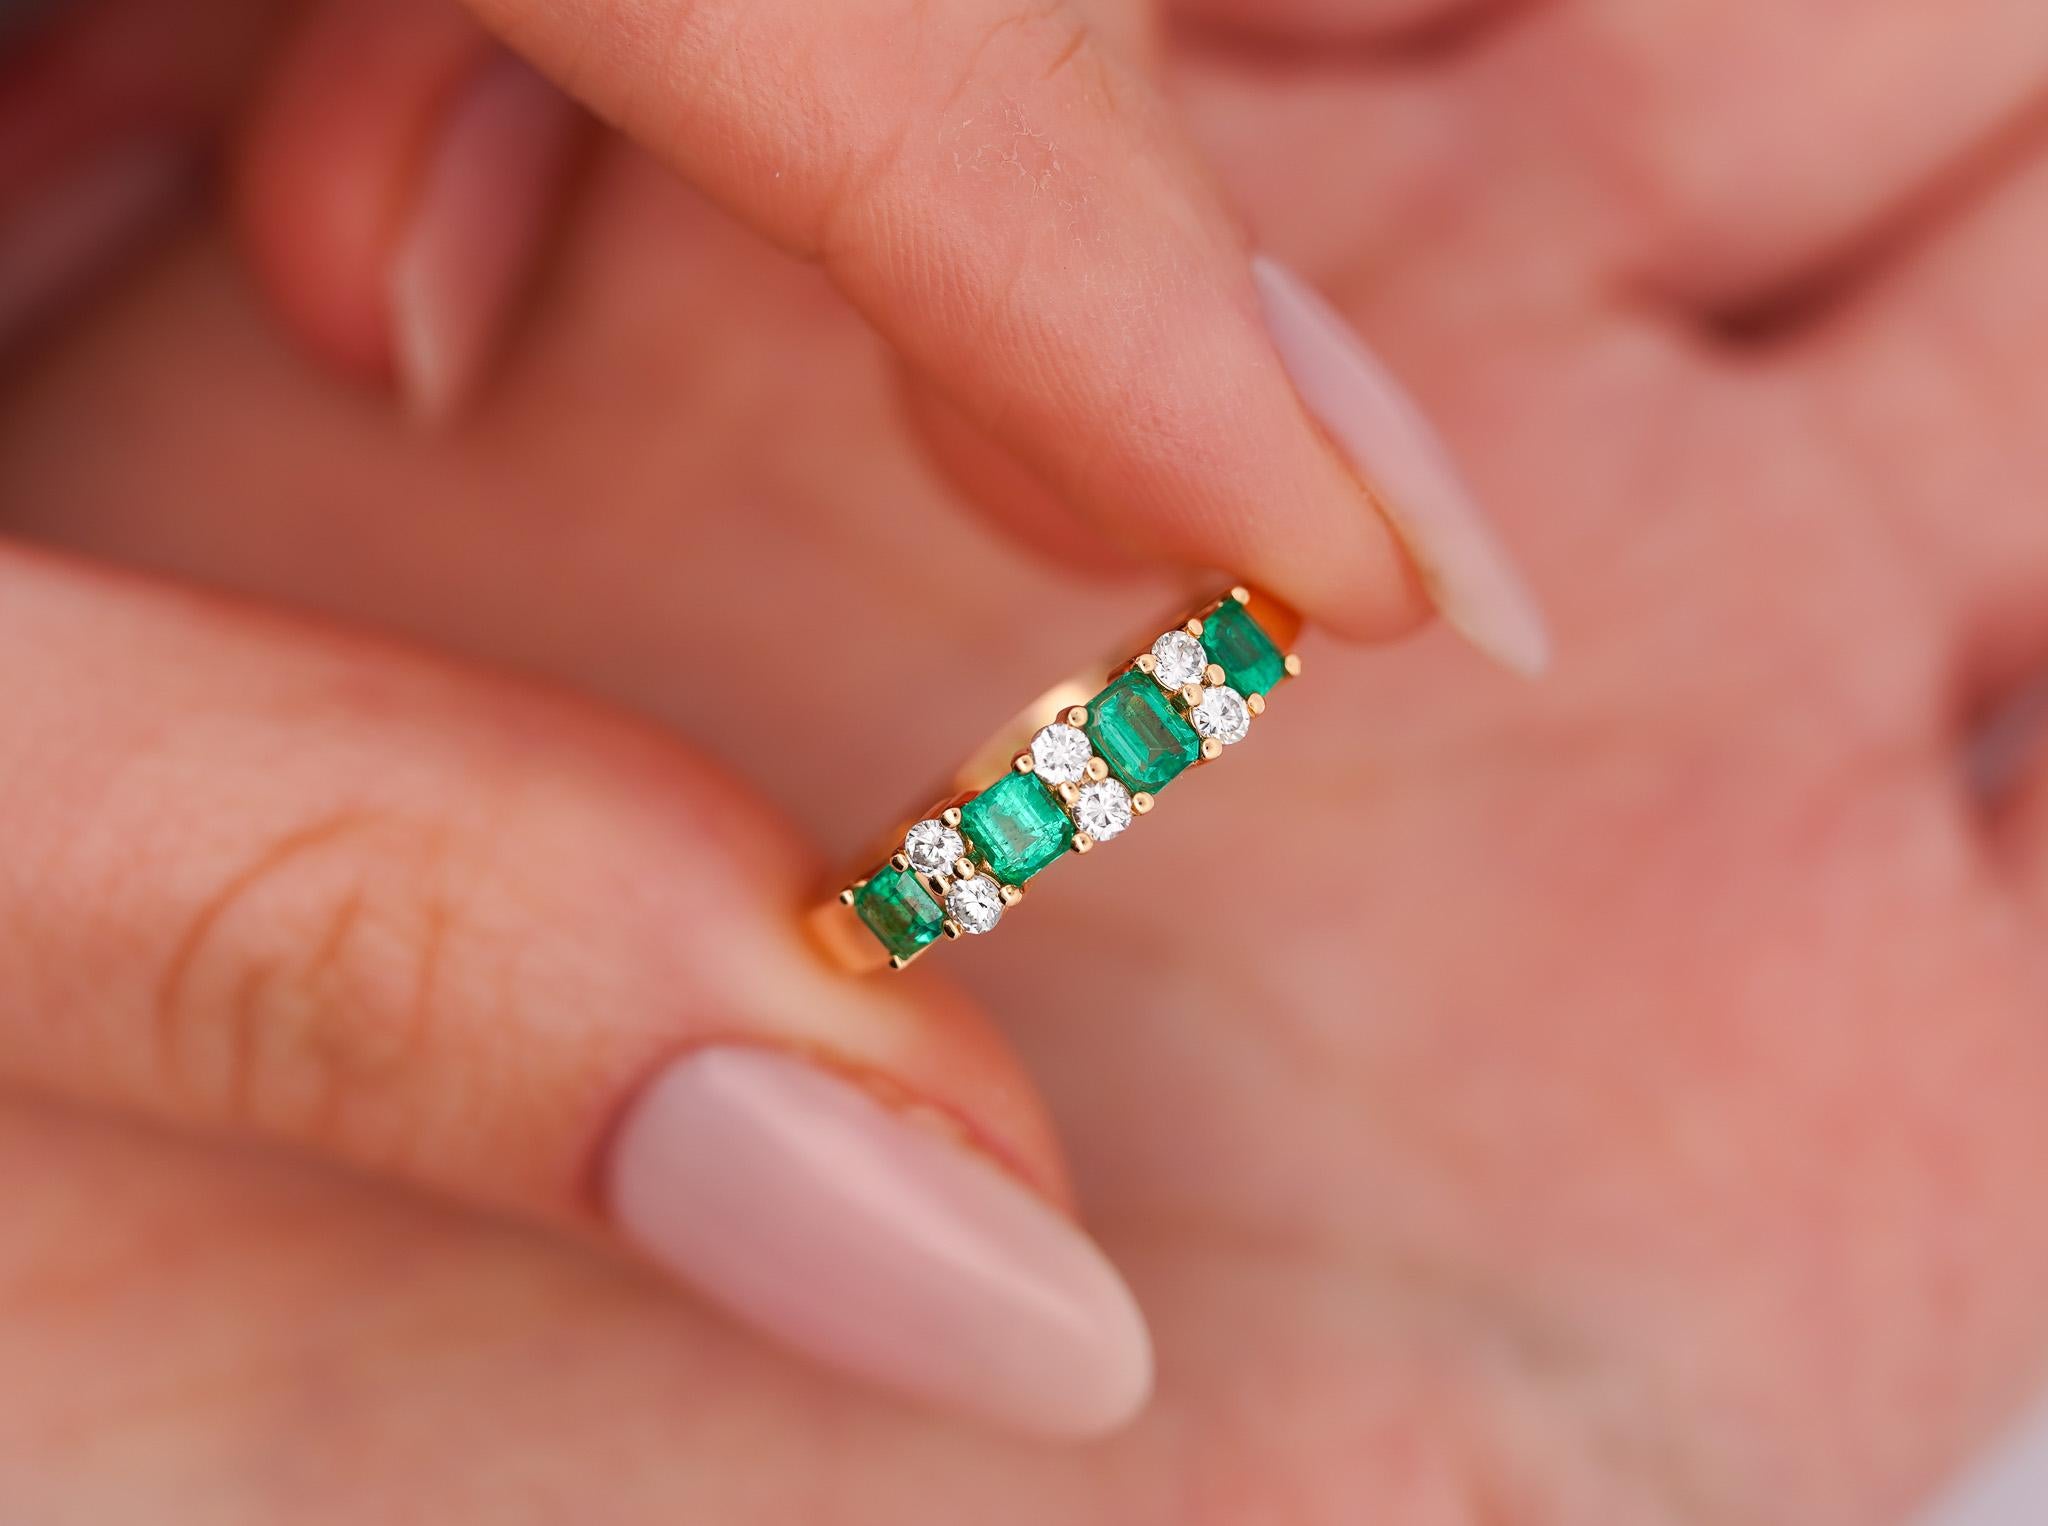 1 carat total natural emerald and diamond band ring in 14k solid yellow gold. The emeralds are rich with color, a vivid green shine with excellent luster and brilliance. A simple but unique emerald band that you will not find elsewhere. 100%